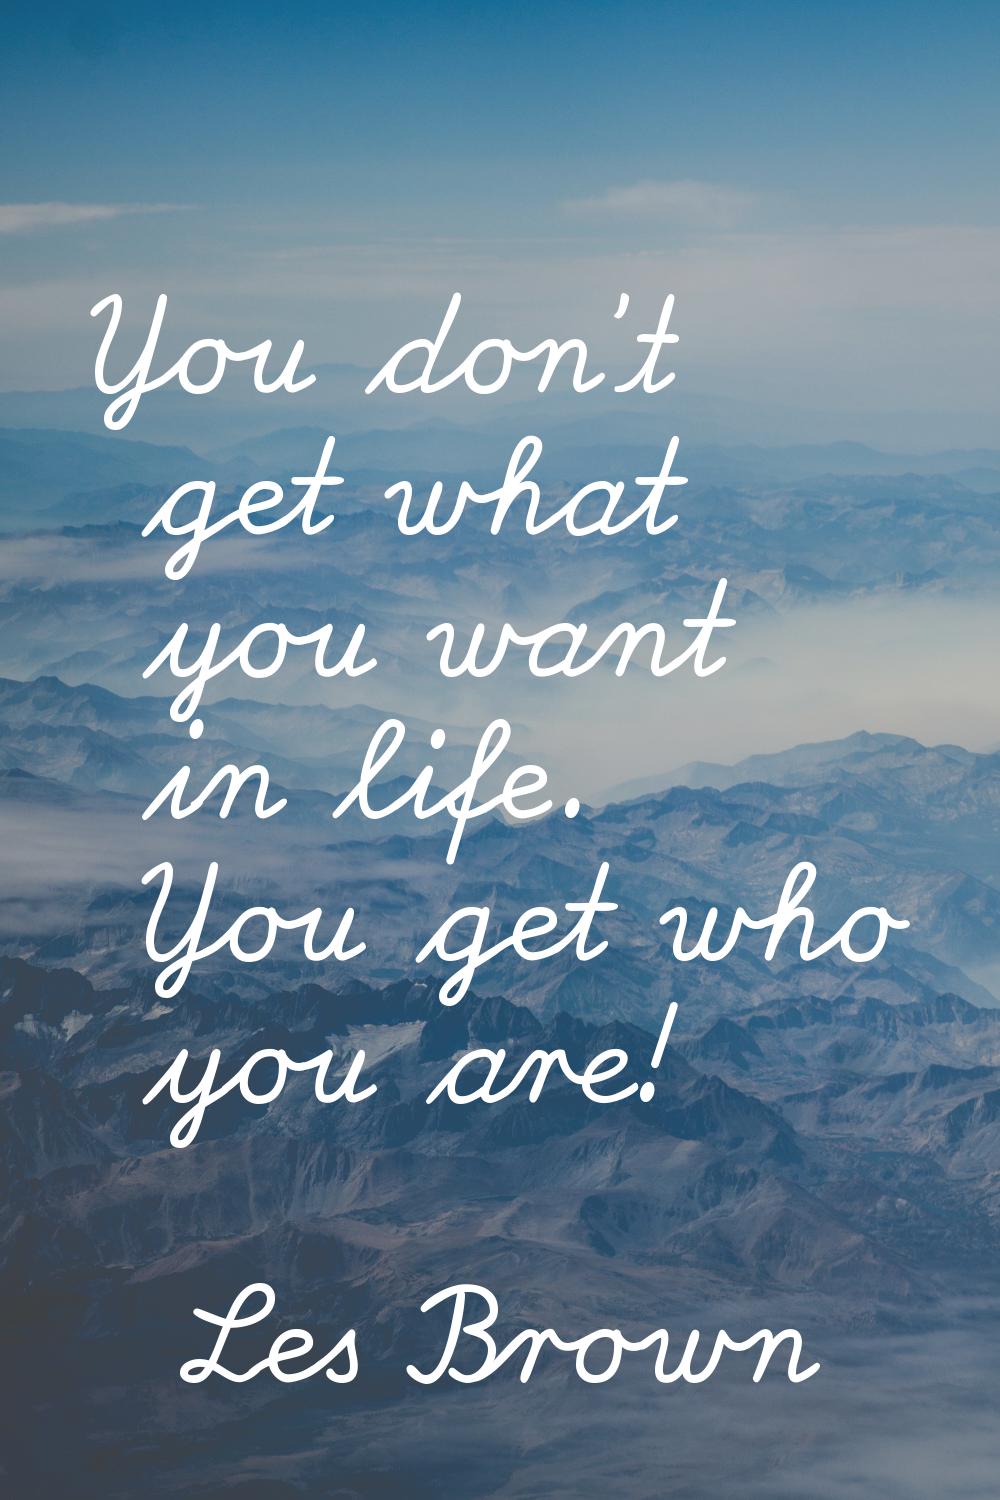 You don't get what you want in life. You get who you are!